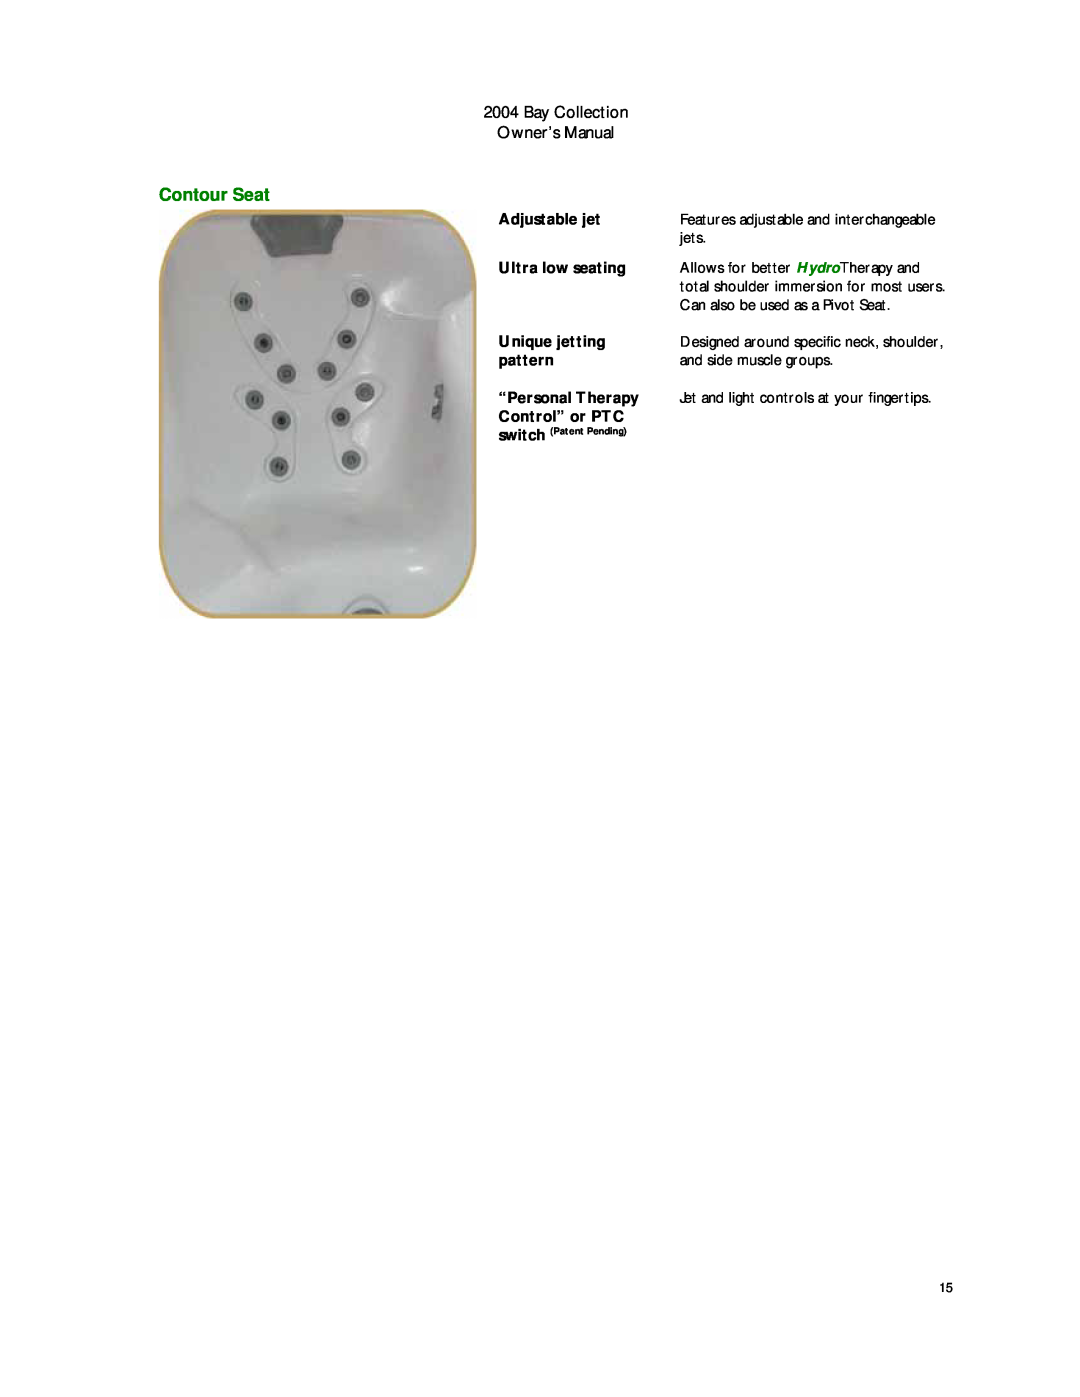 Dimension One Spas manual Contour Seat, Bay Collection Owner’s Manual 